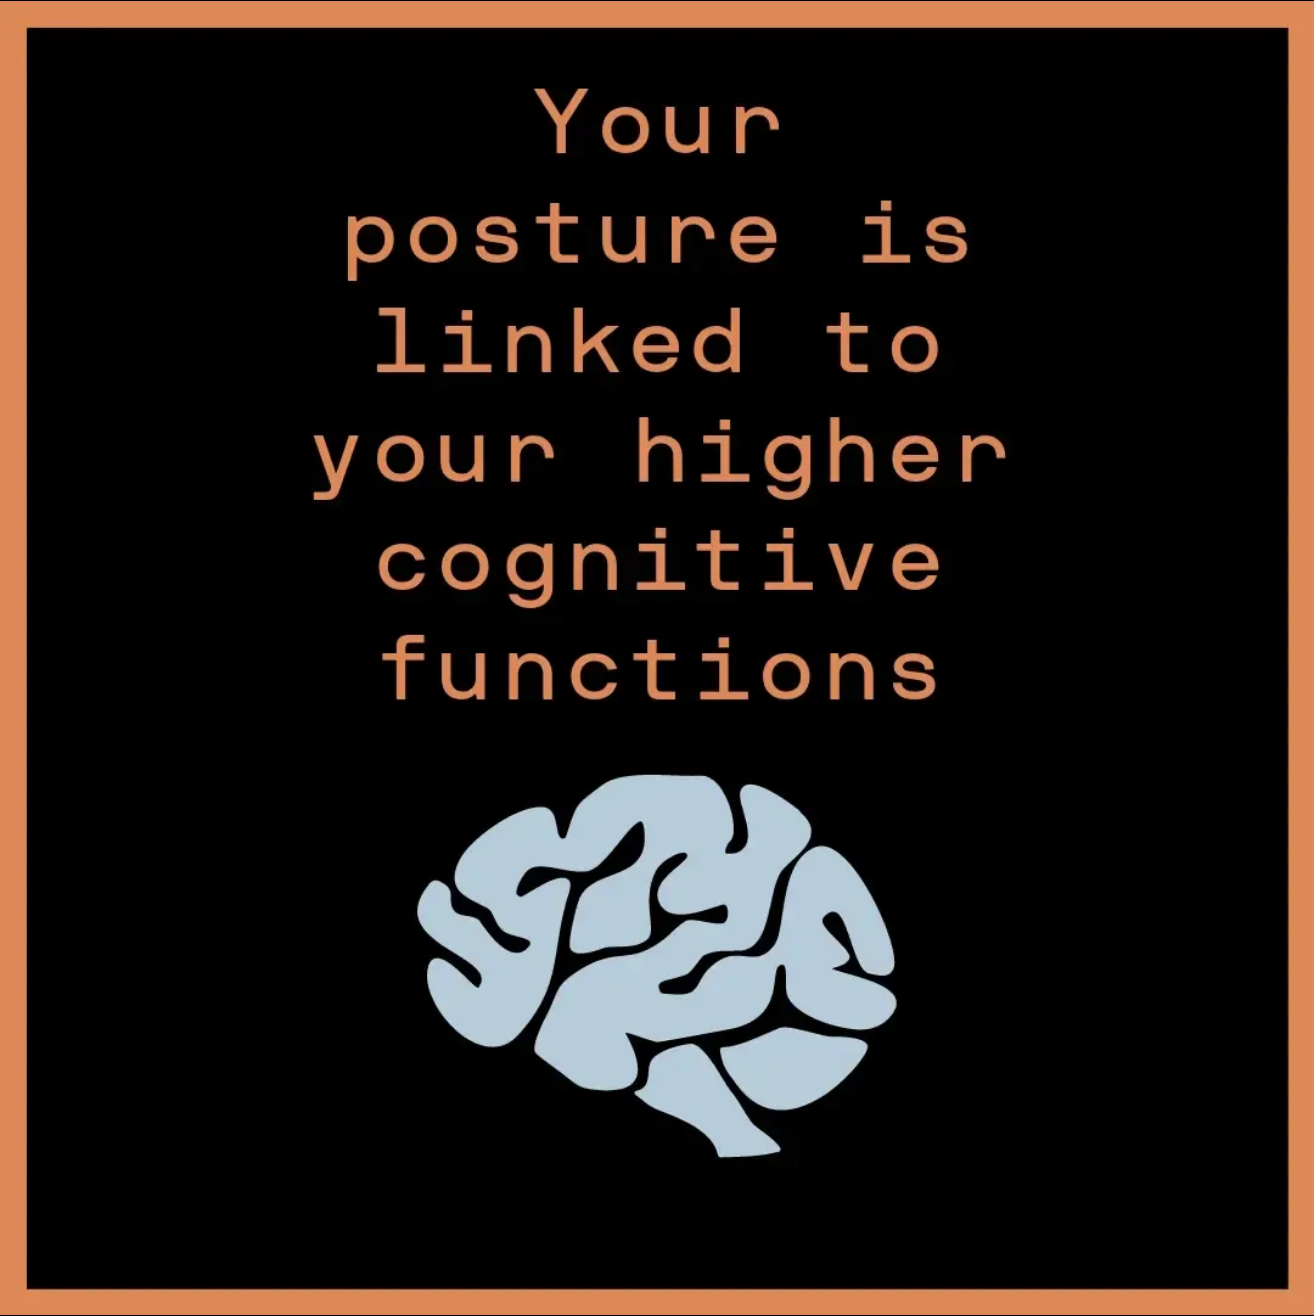 Your Posture is Linked to Your Higher Cognitive Functions